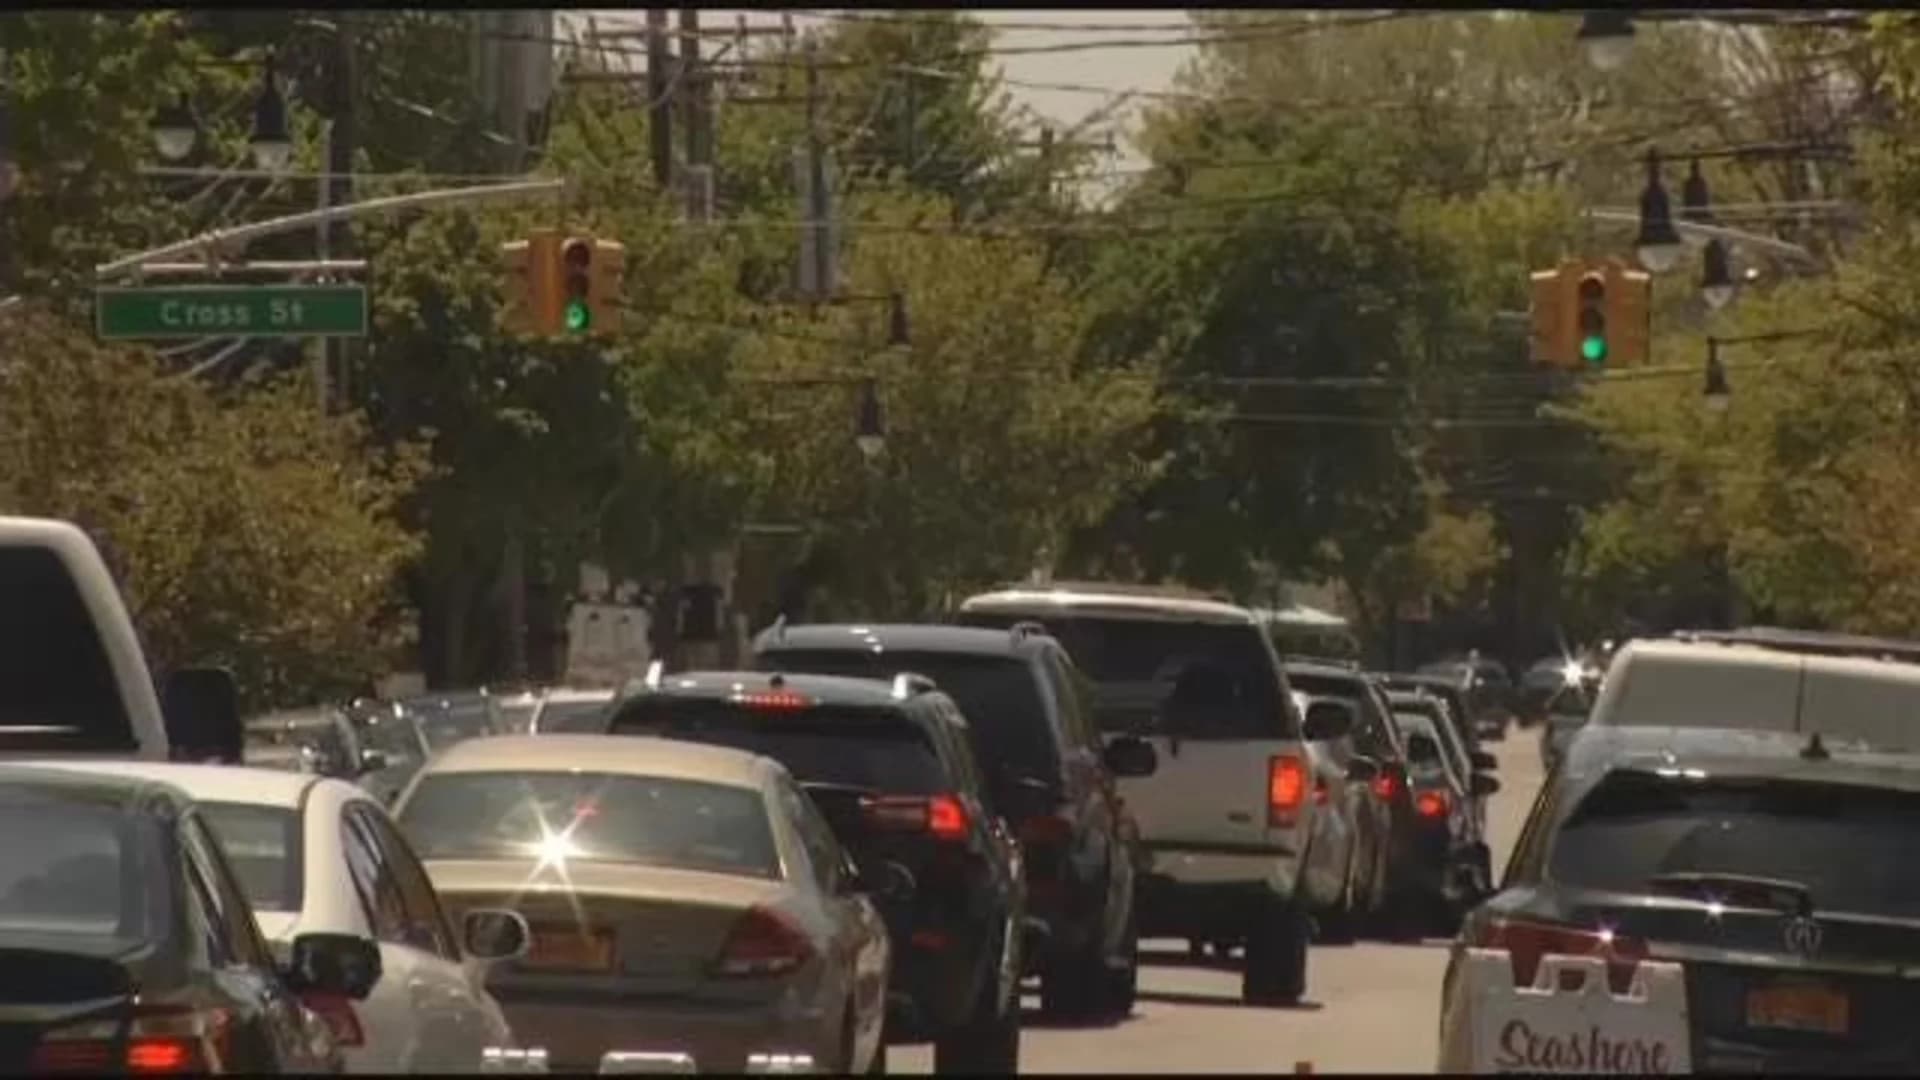 Mother’s Day meals means more traffic on City Island